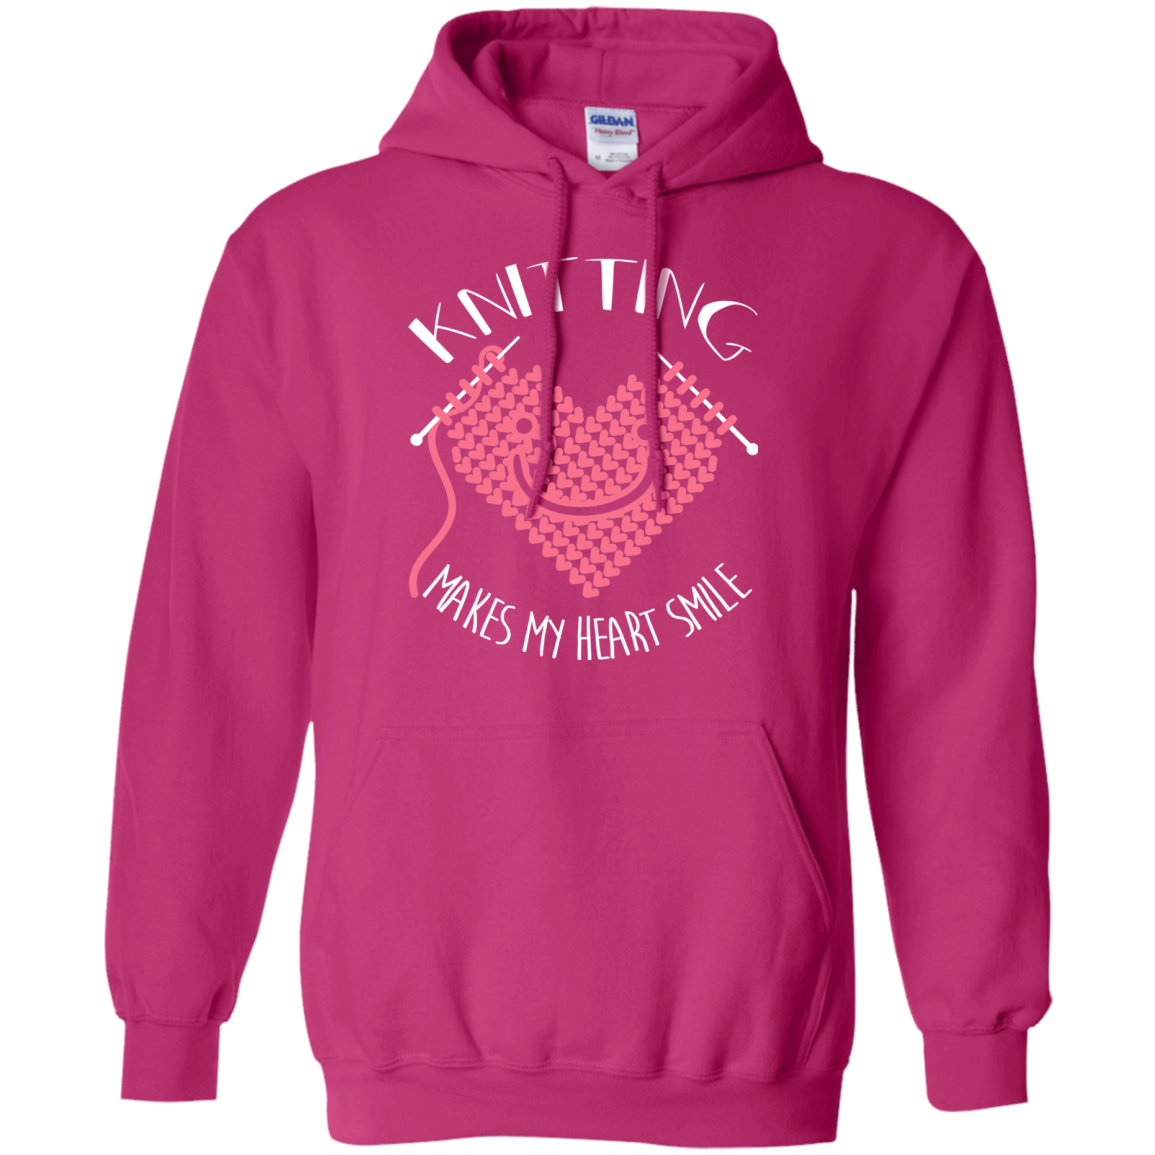 Knitting Makes My Heart Smile Pullover Hoodie